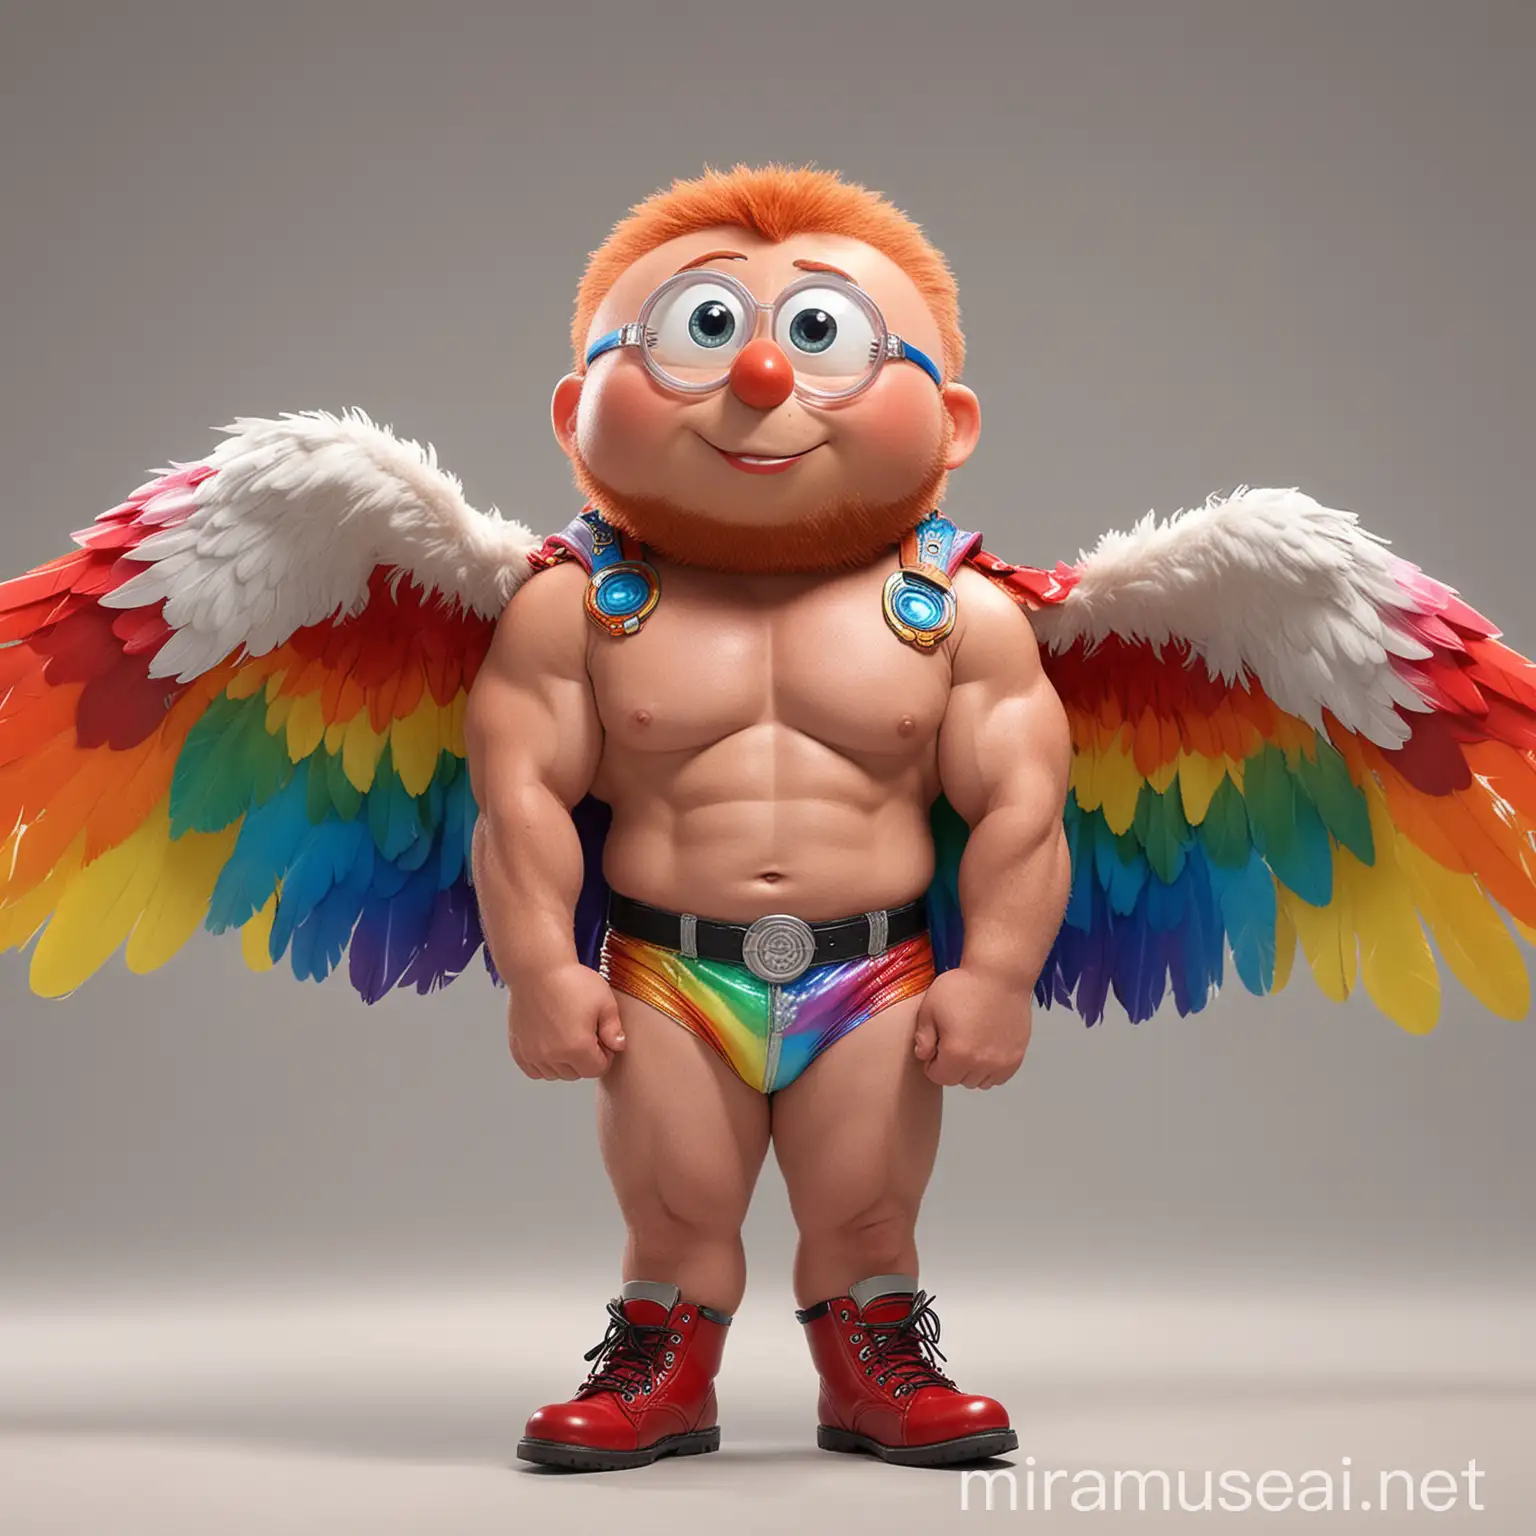 Muscular Redheaded Bodybuilder Flexing with RainbowColored Eagle Wings Jacket